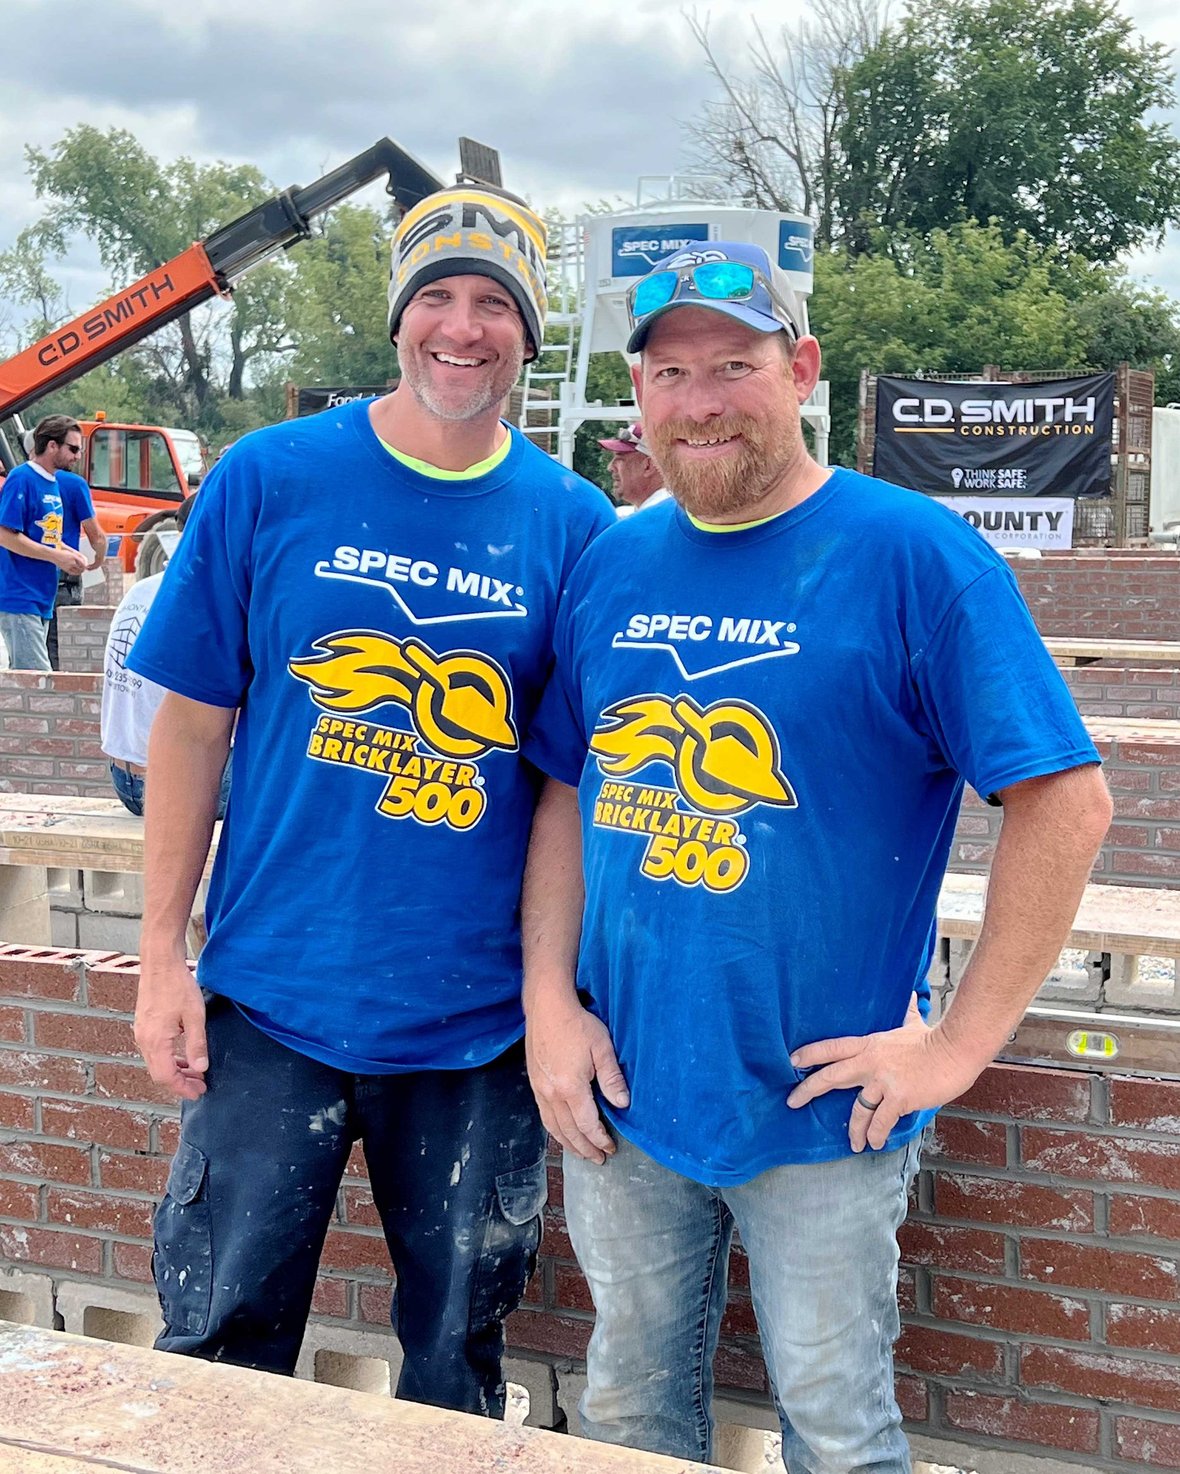 C.D. Smith Masonry Construction Team at the 2022 SPEC MIX BRICKLAYER 500 Regional Series at Fond du Lac Stone 